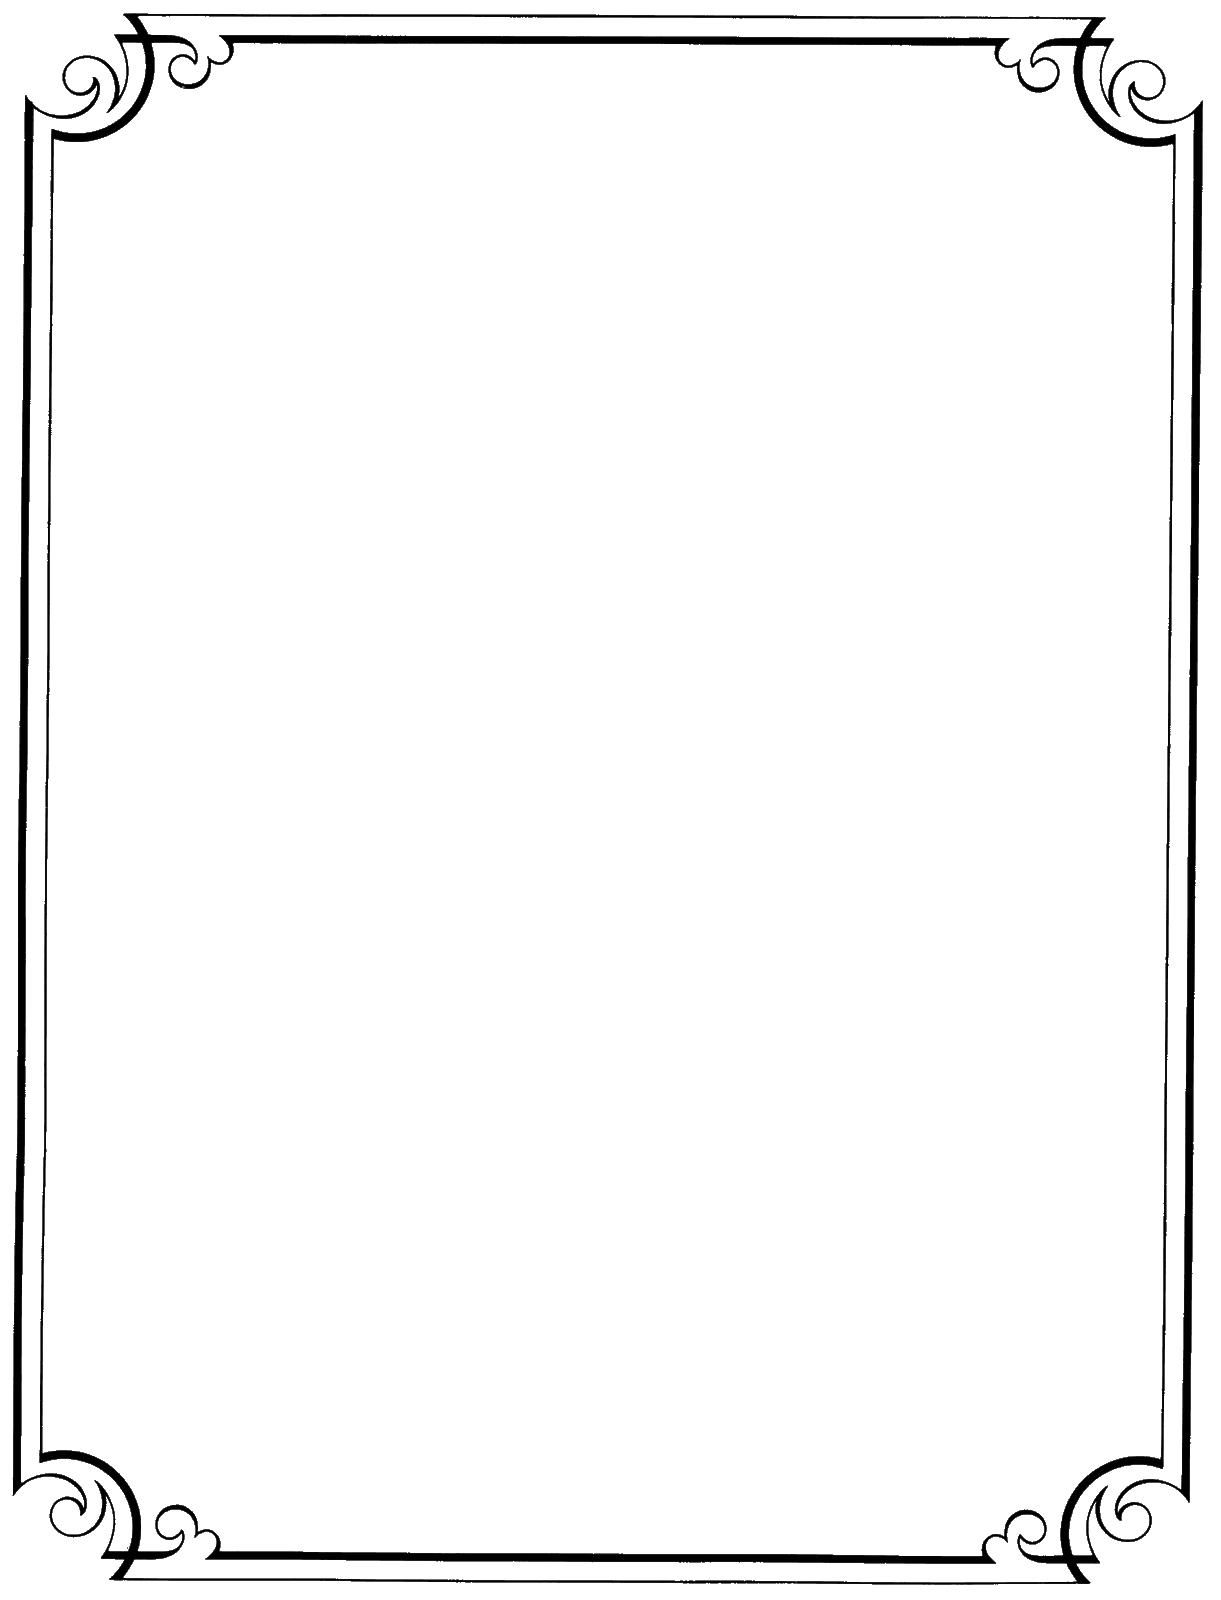 Fancy frame png. Page borders clipart best